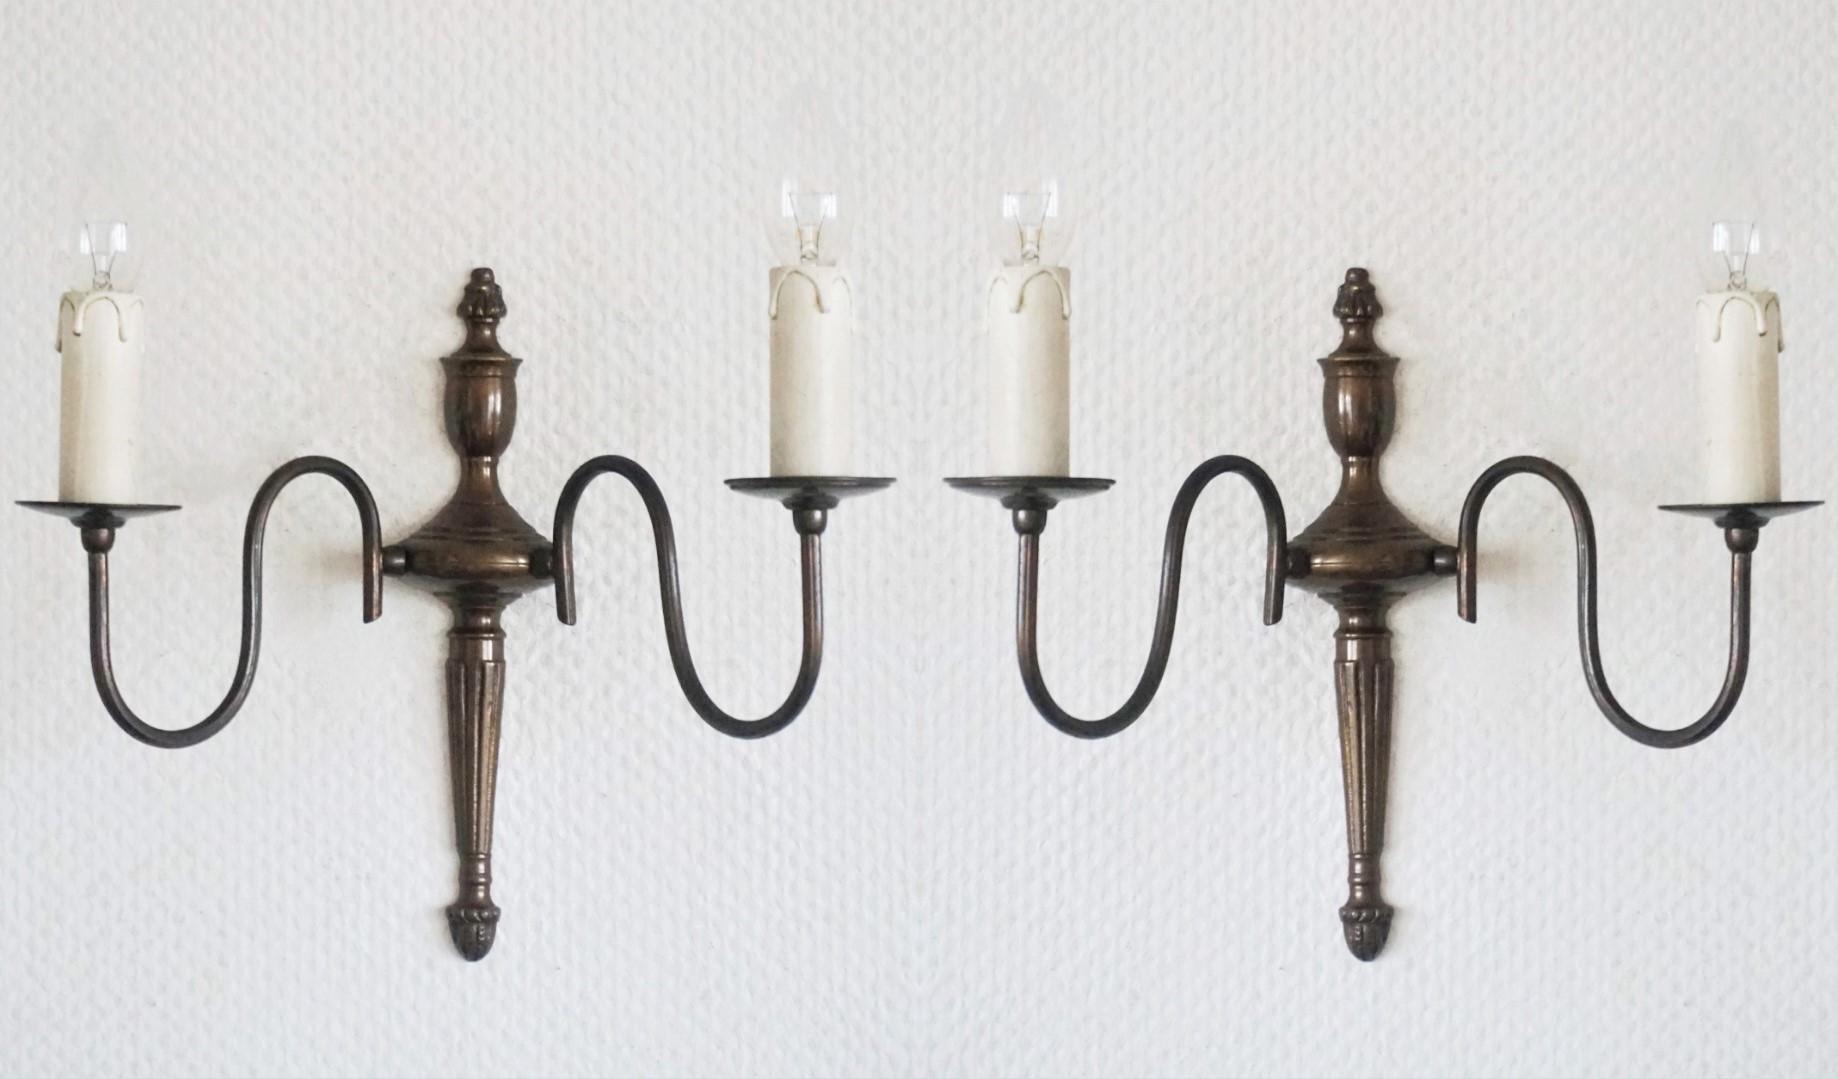 Set of four cast brass two-light wall sconces in Flemish style with two arms in double volute.
All four sconces are in very good condition, hand polished and rewired.
Number of lights: Two E14 candelabras bulb sockets each sconce.
Measures without